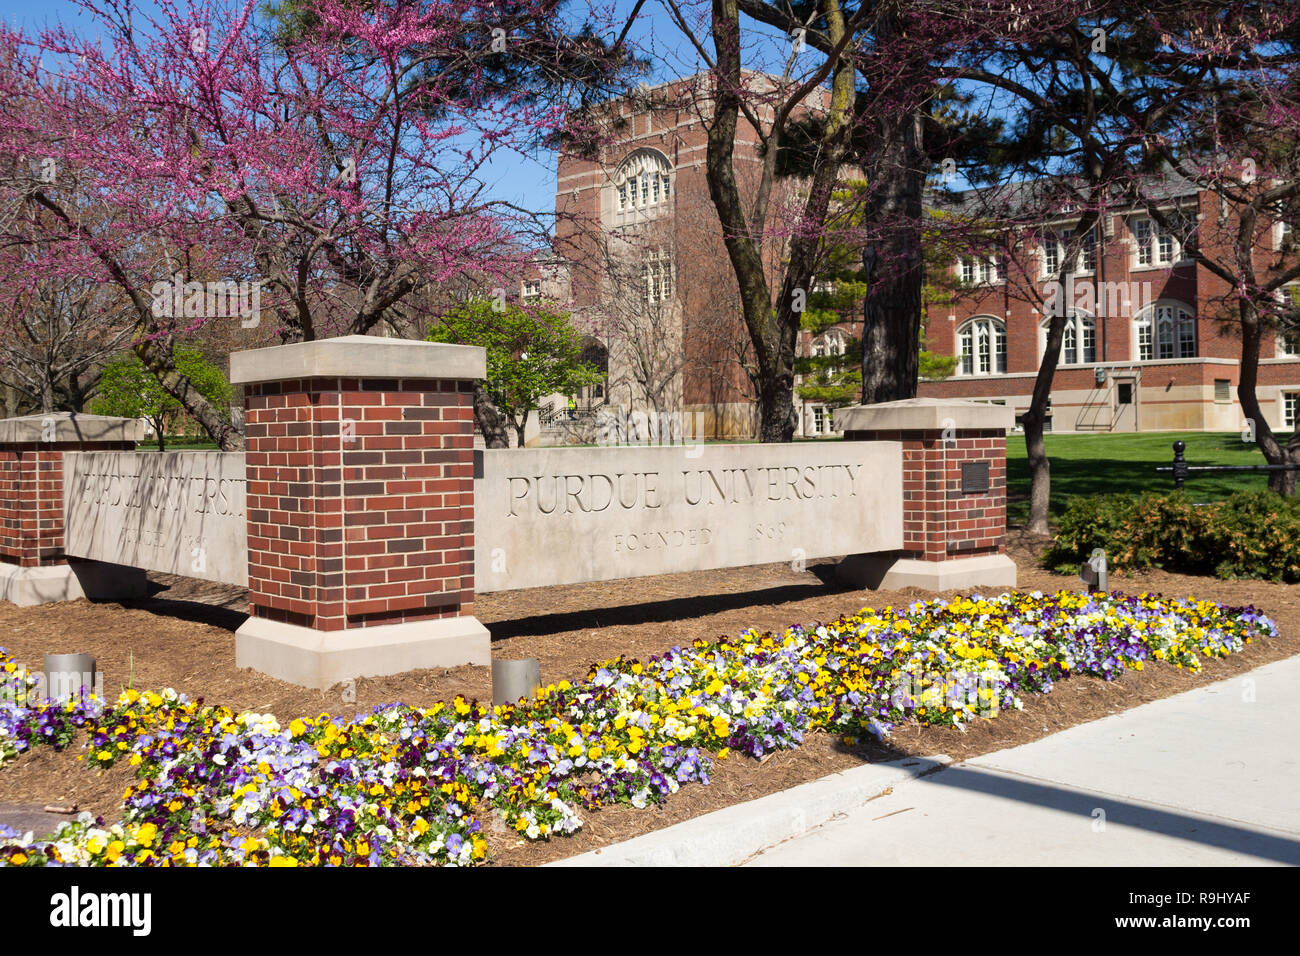 Purdue University sign in spring outside Memorial Union, Purdue University campus, West Lafayette, Indiana, United States Stock Photo